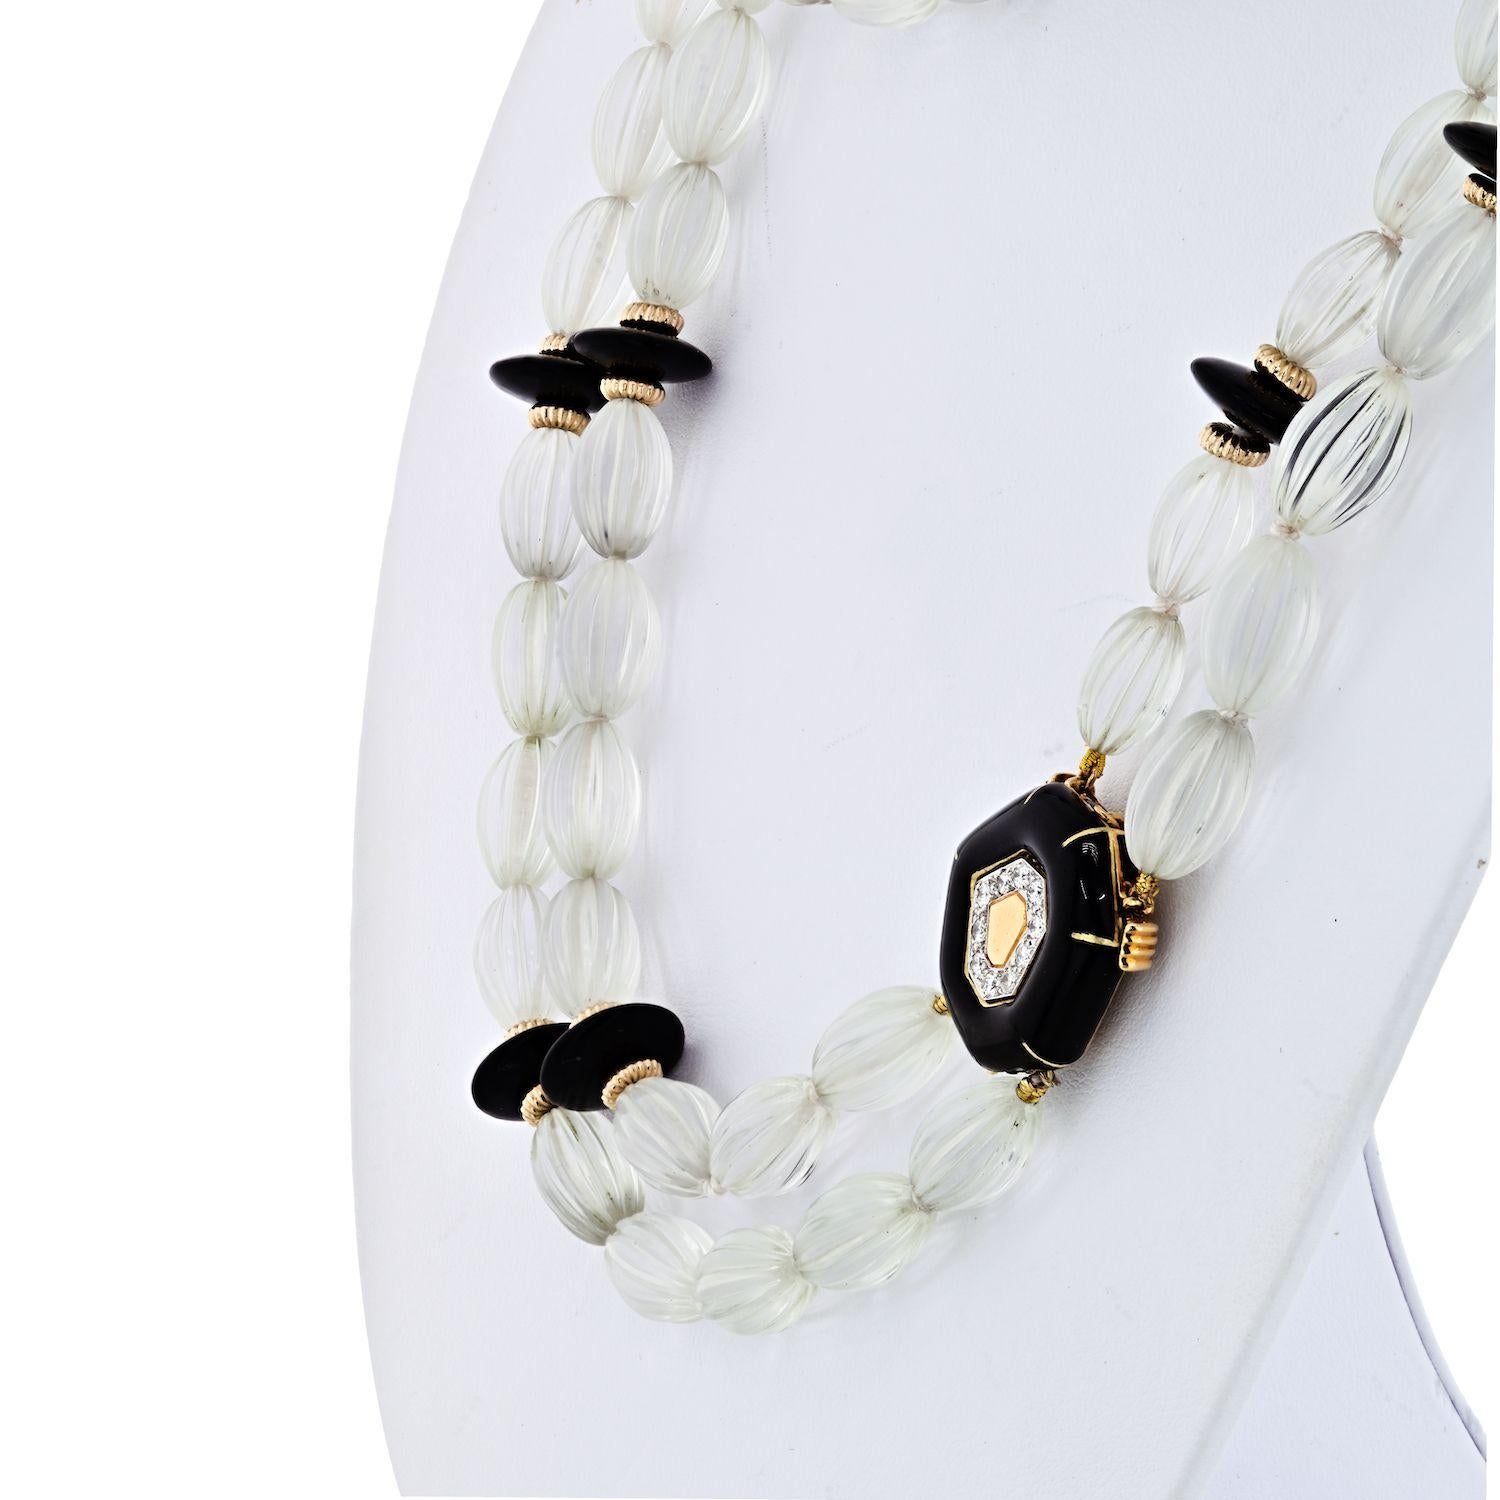 Very rare David Webb bead necklace, composed of larger barrel-shaped rock crystal beads, alternating with black onyx, 18k white gold and gold rondelles. 

Diamonds are pave set on the two larger onyx pieces. 

This necklace can be worn short, medium